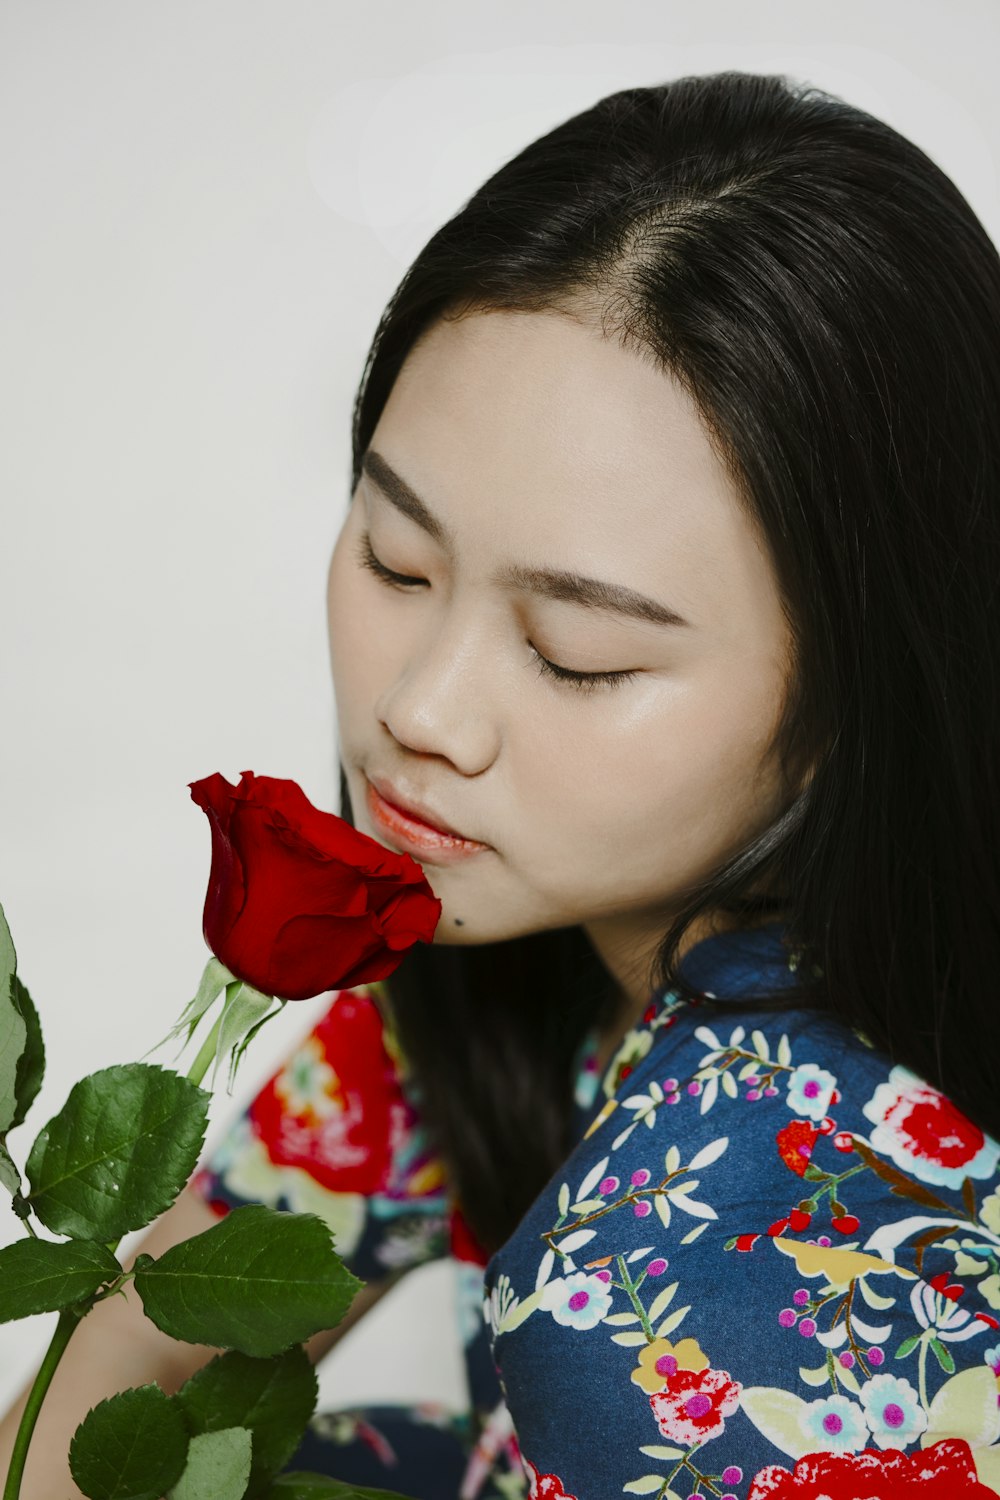 woman in blue and red floral shirt holding red rose